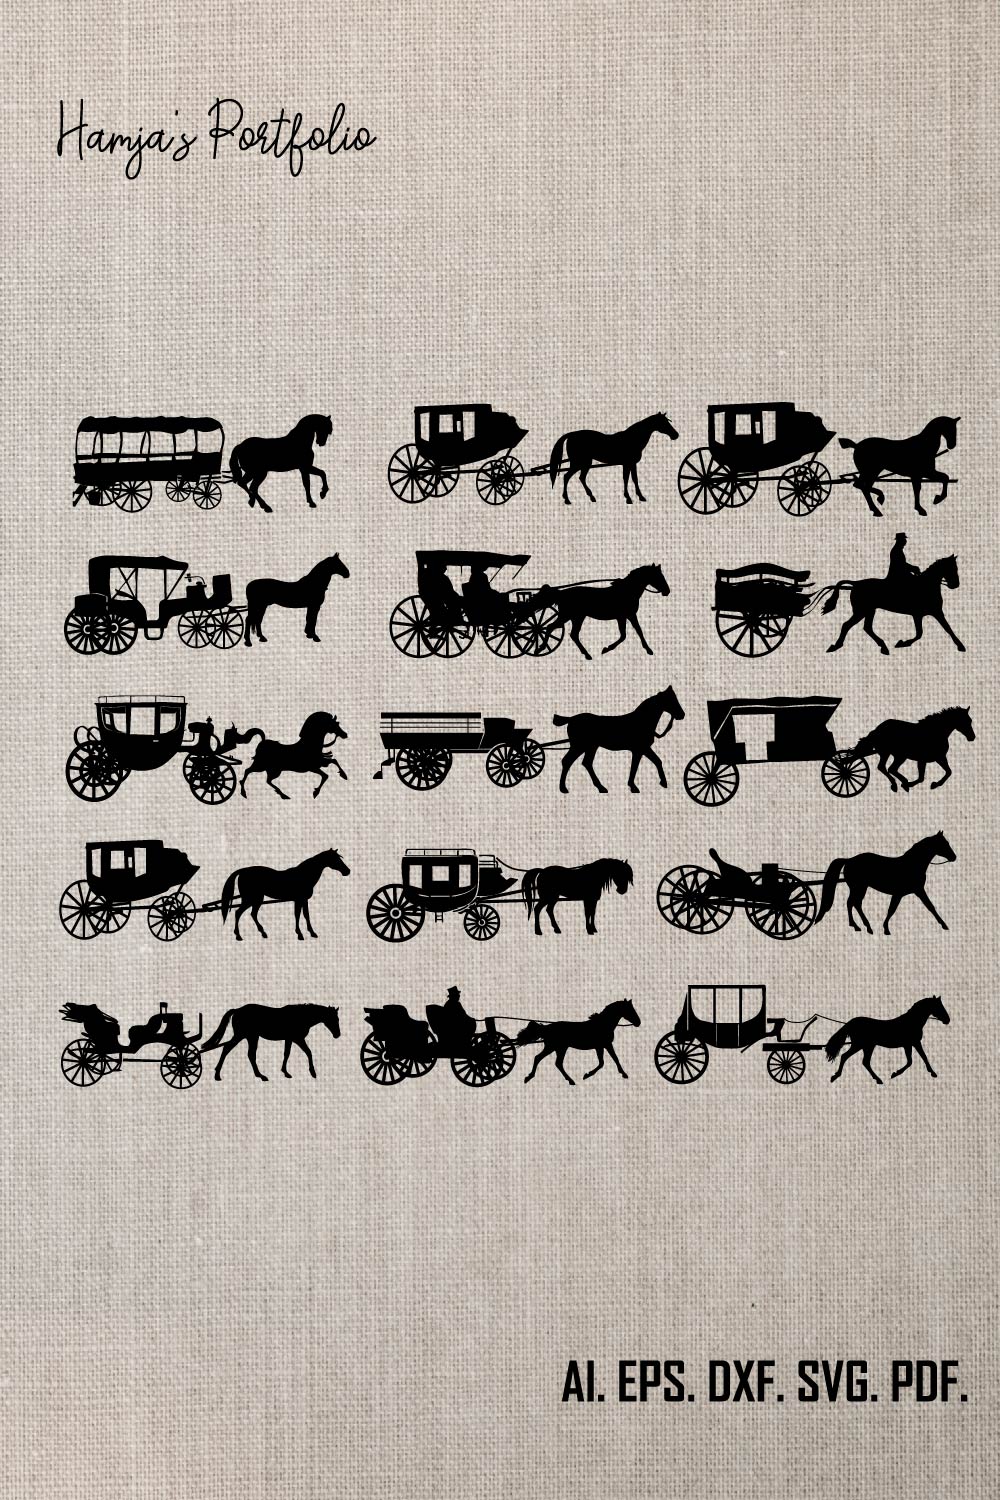 Horse Carriages Silhouettes,Carriage Silhouette svg,Disney Carriage svg Bundle,Carriage with horse svg bundle horse car svg pinterest preview image.